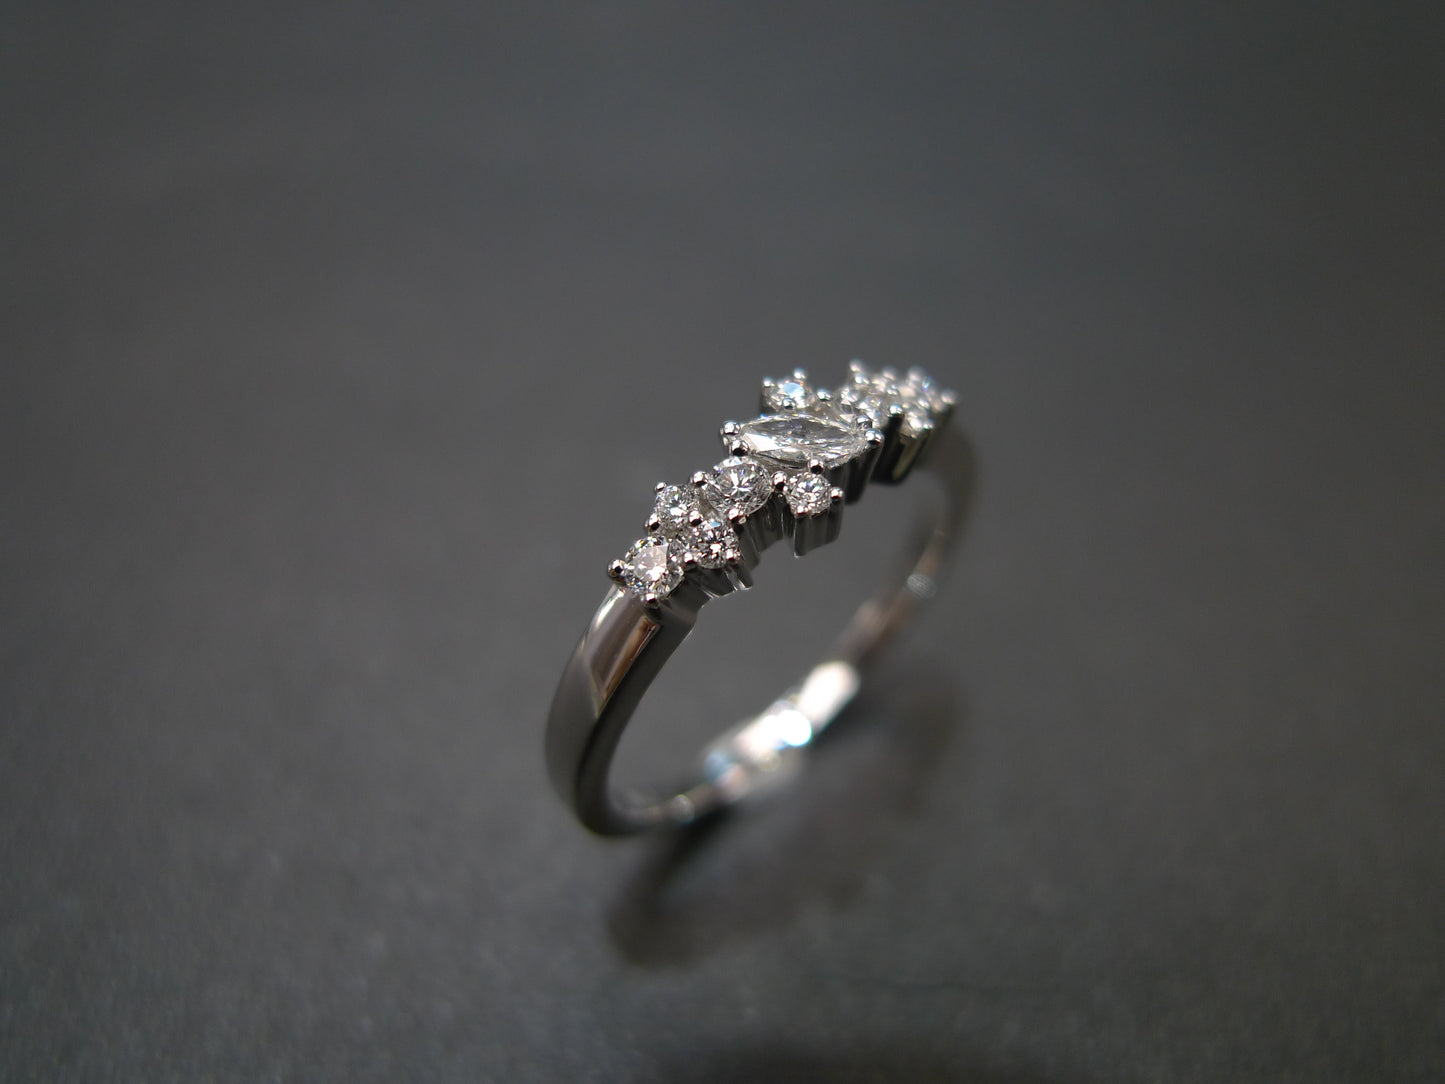 Marquise Diamond Ring in 14K White Gold - HN JEWELRY